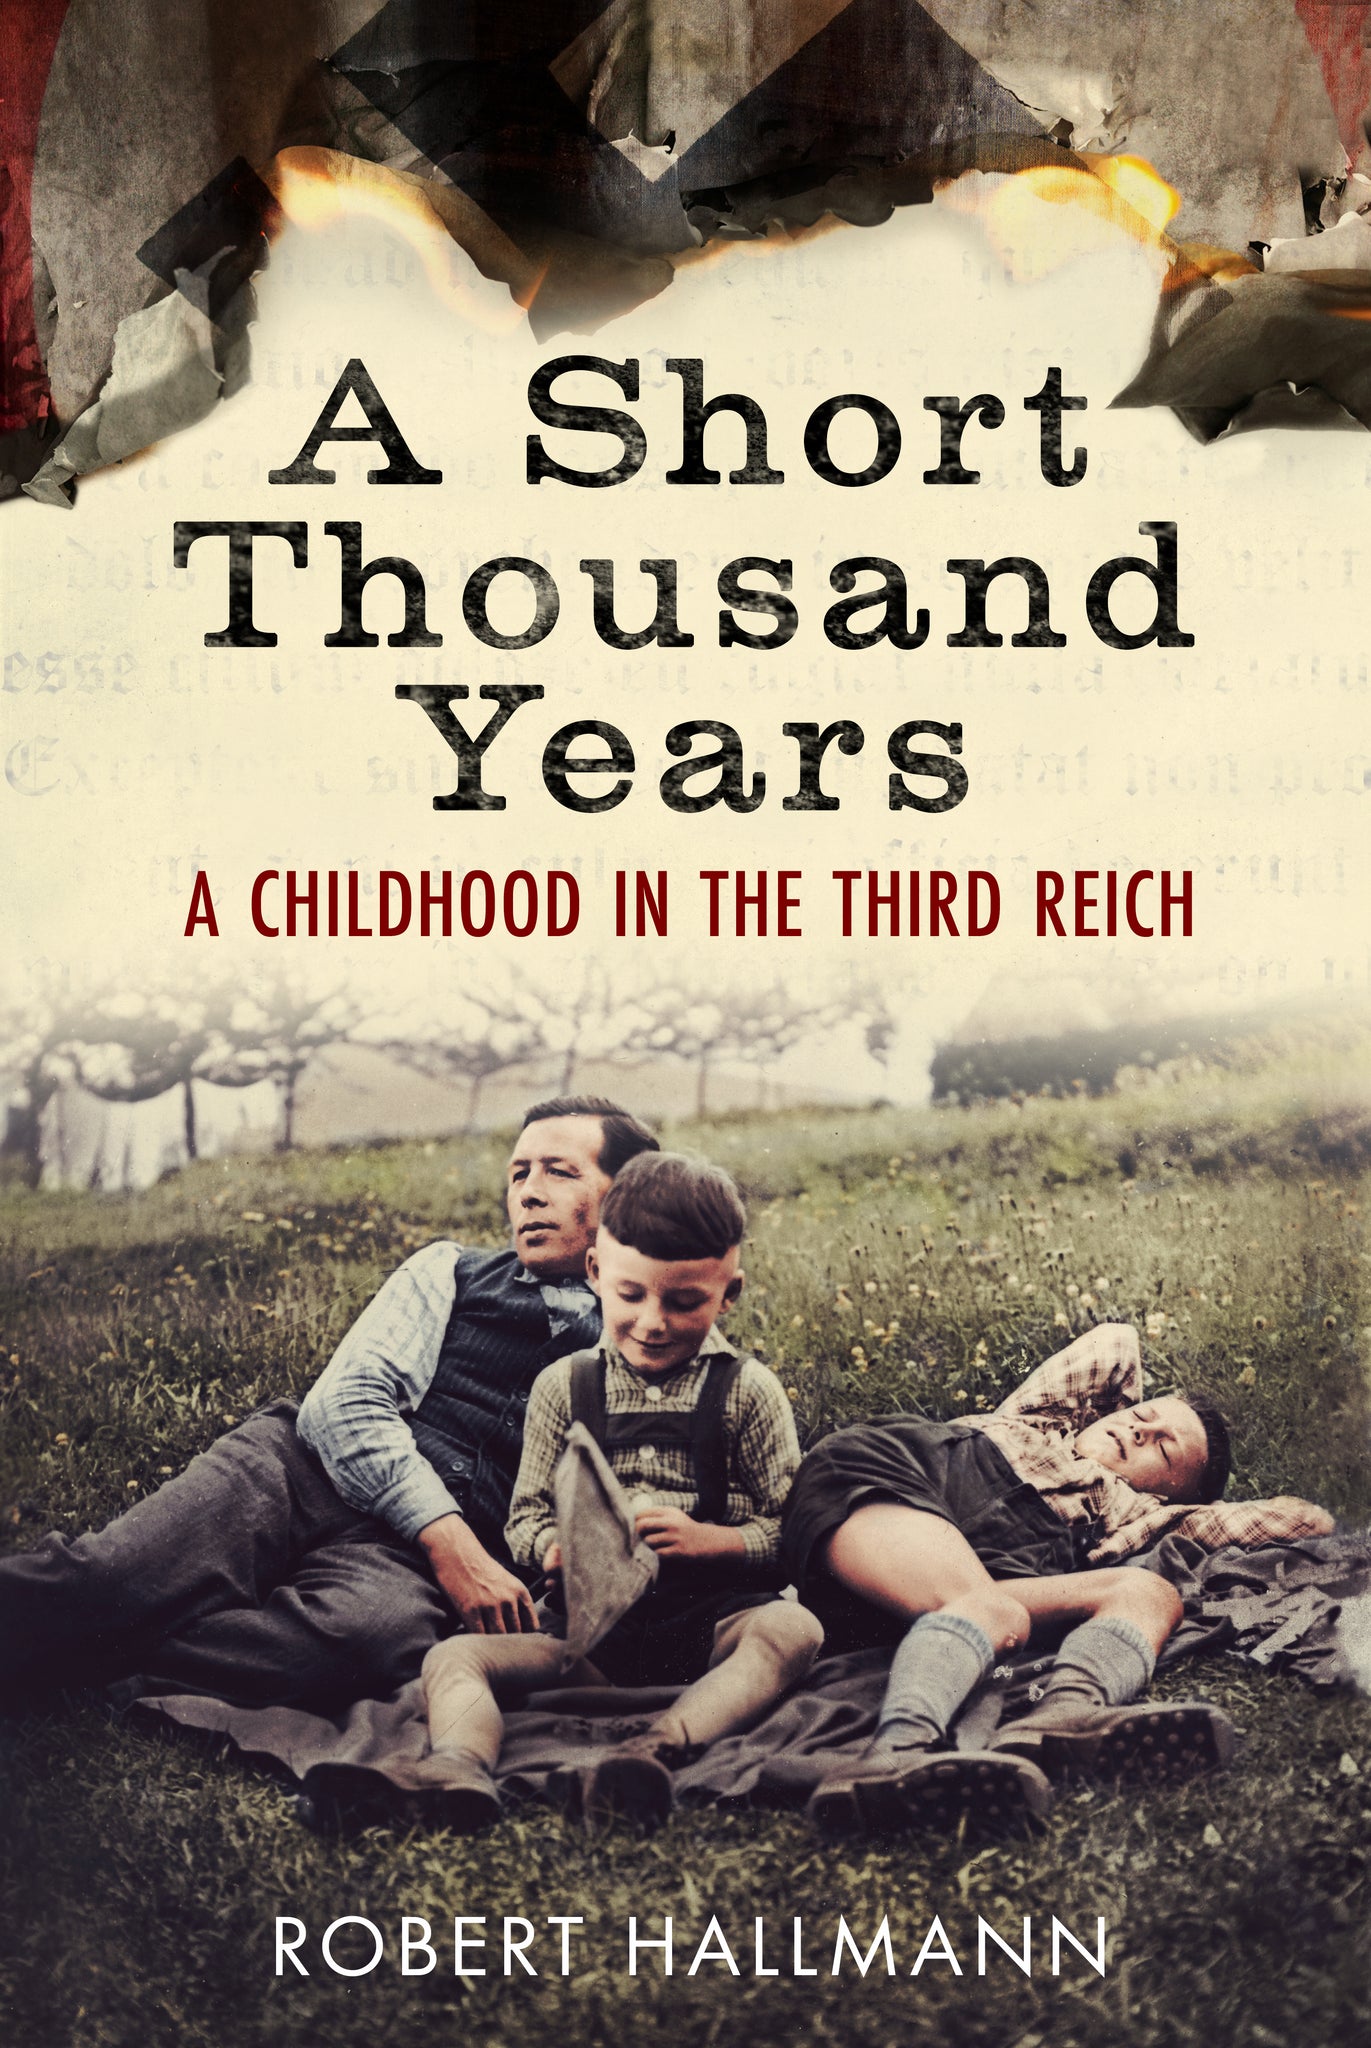 A Short Thousand Years: A Childhood in the Third Reich - available now from Fonthill Media